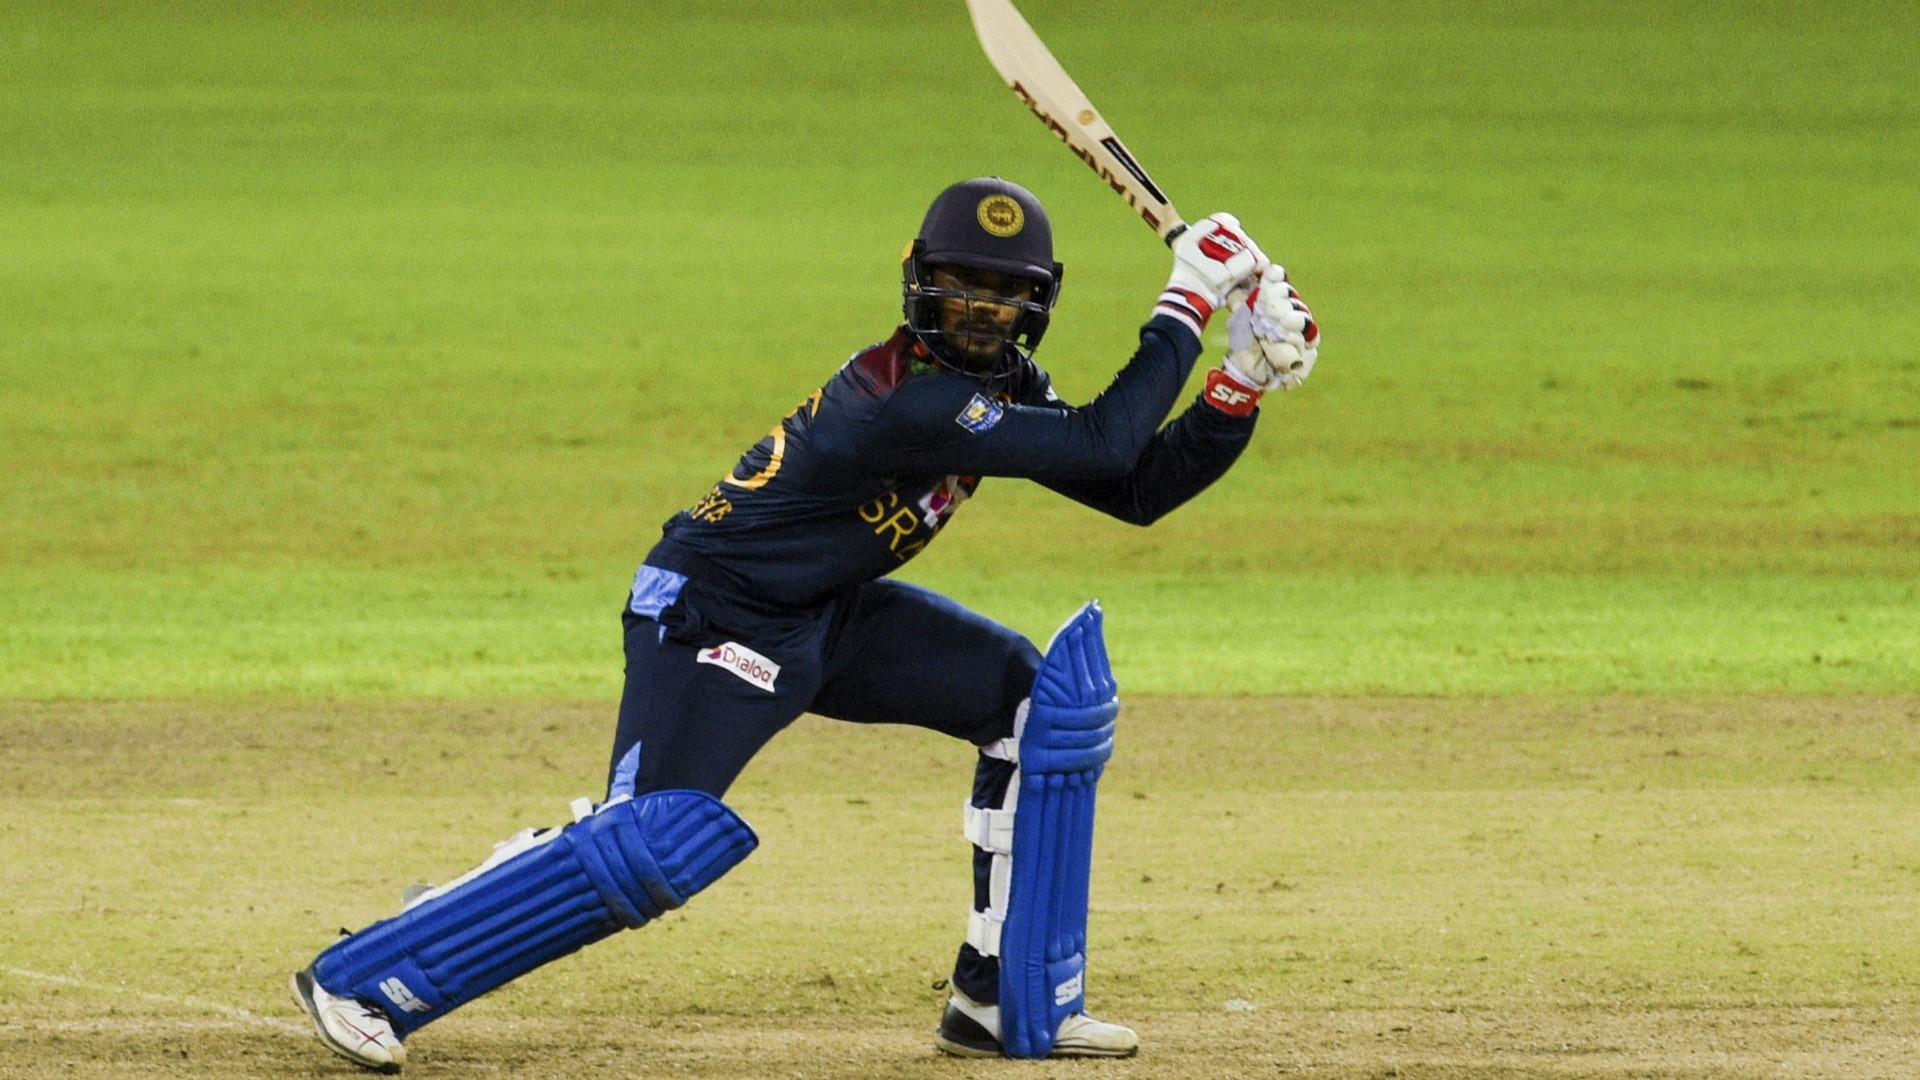 An India team featuring four debutants were beaten by Sri Lanka in the second T20I in Colombo.